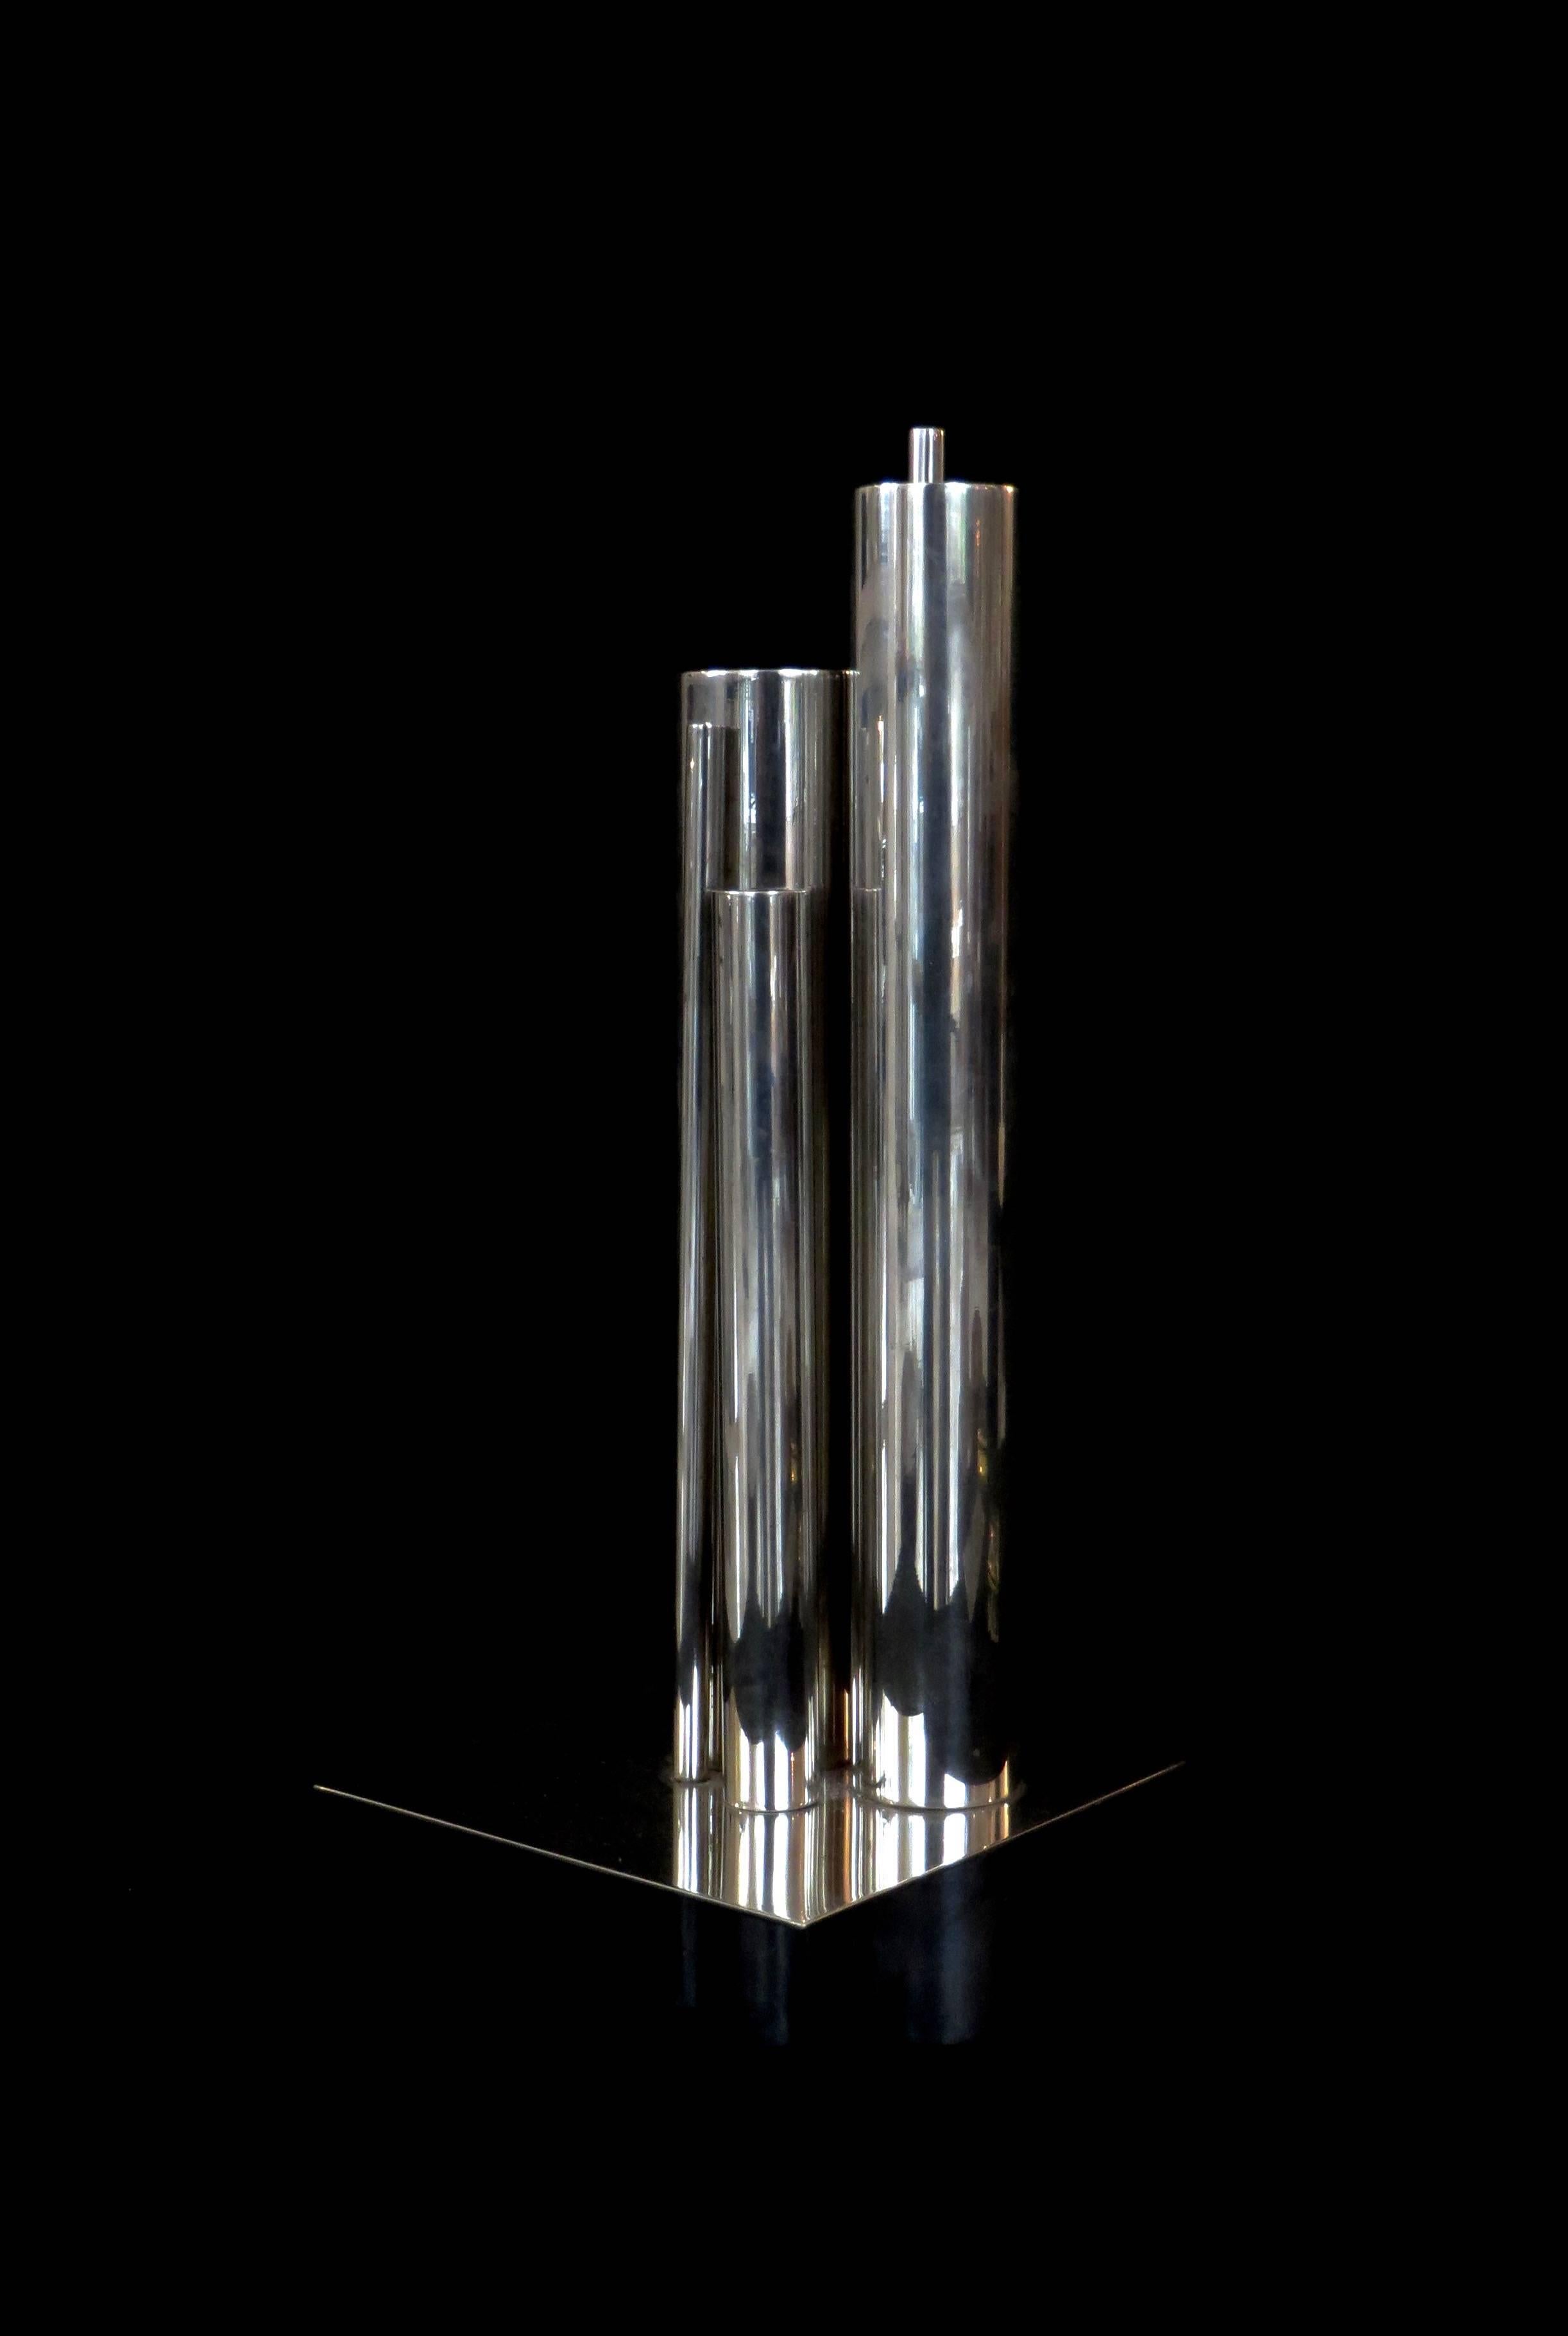 The Jacques Sitoleux vase comprising tubes in varying heights and diameters grouped together and raised on a thin plate, all in silver plated brass. Sometimes referred to as the Polivaso.
Stamped with manufacturer's hallmark to one of the tubes. 
